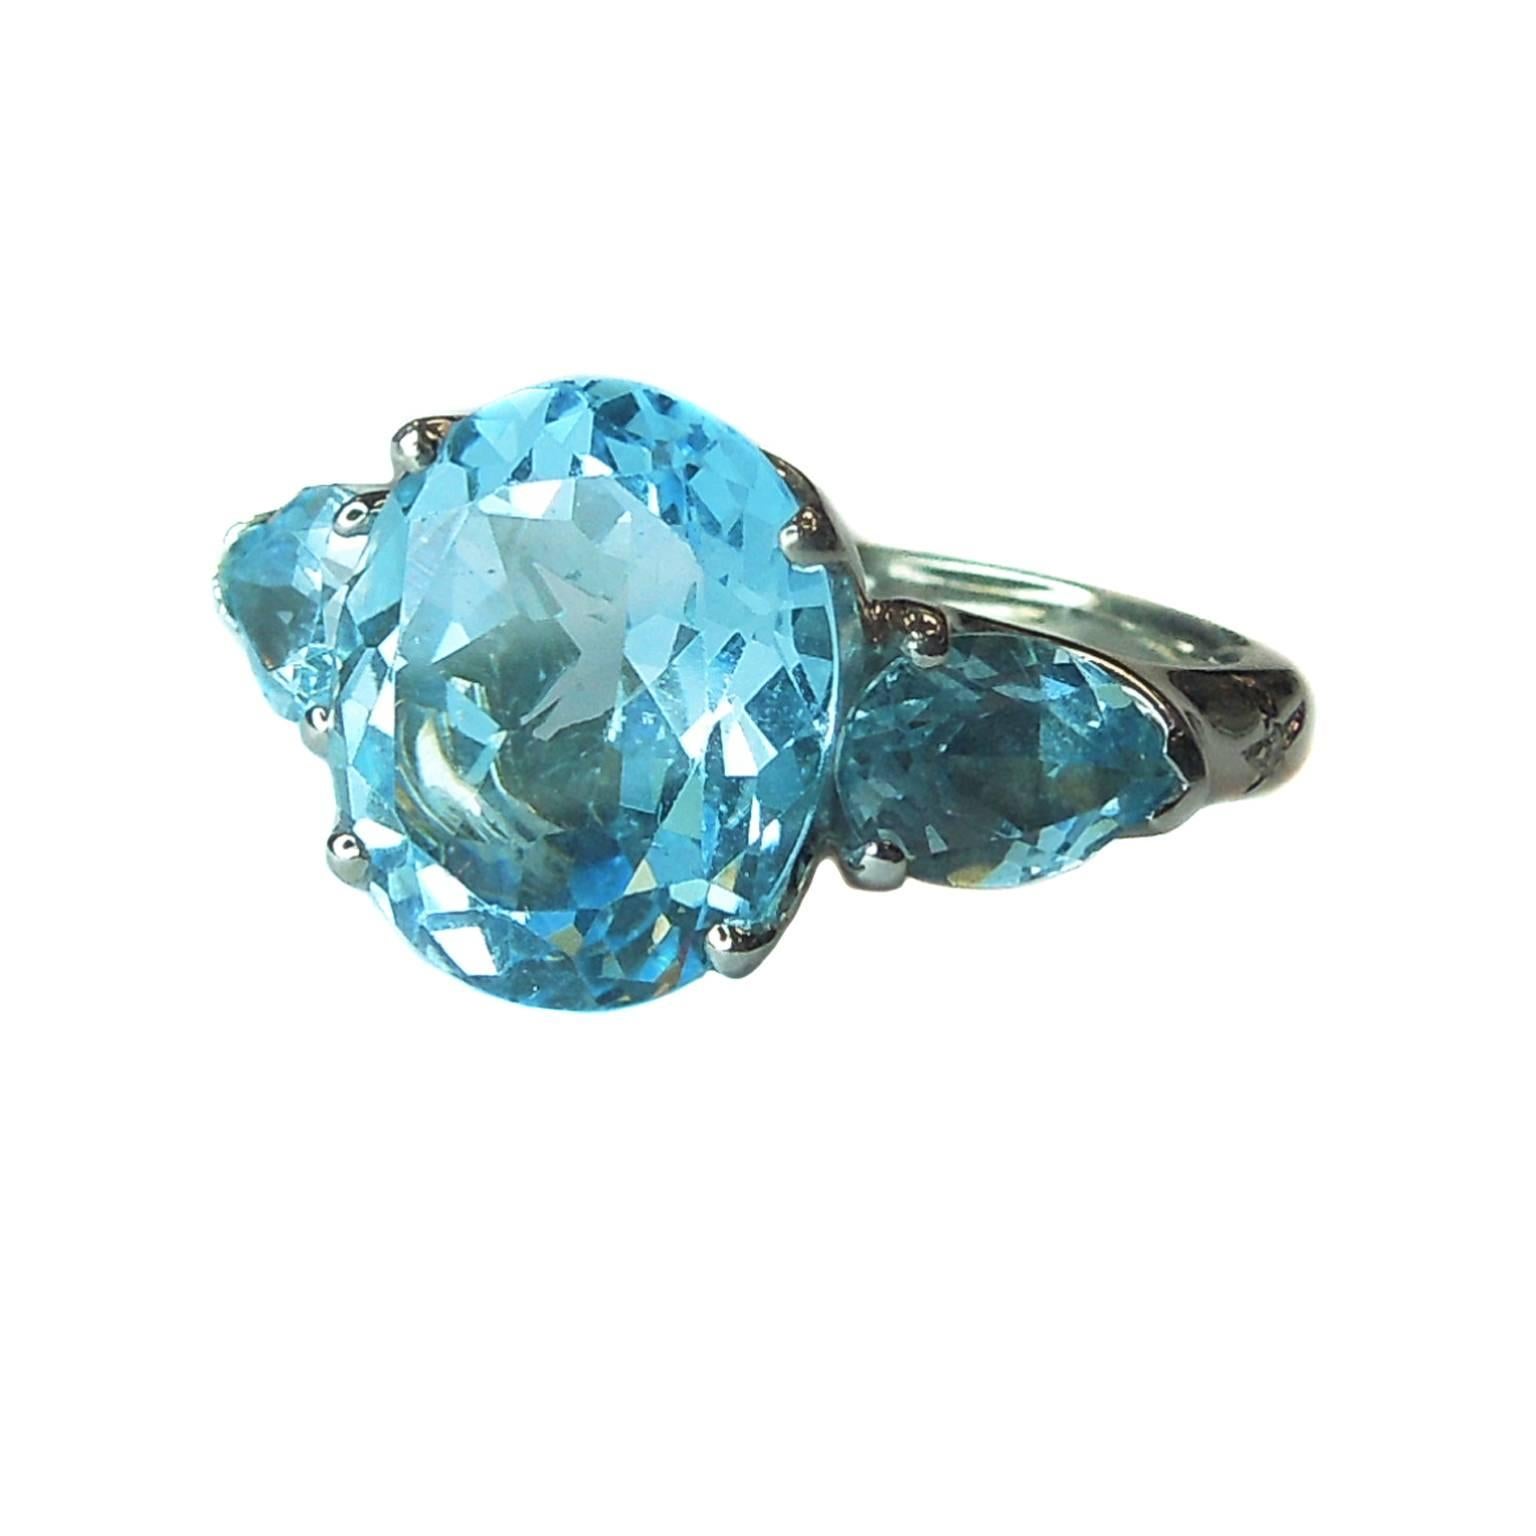 18K White Gold Ring with Three Blue Topaz and touch of diamonds

7.20ct. Blue Topaz total weight. Center is oval shape and sides are pear shape. 

Both sides of ring have tiny touch of diamonds on stars.

Currently size 6.5. Can be sized.

Original